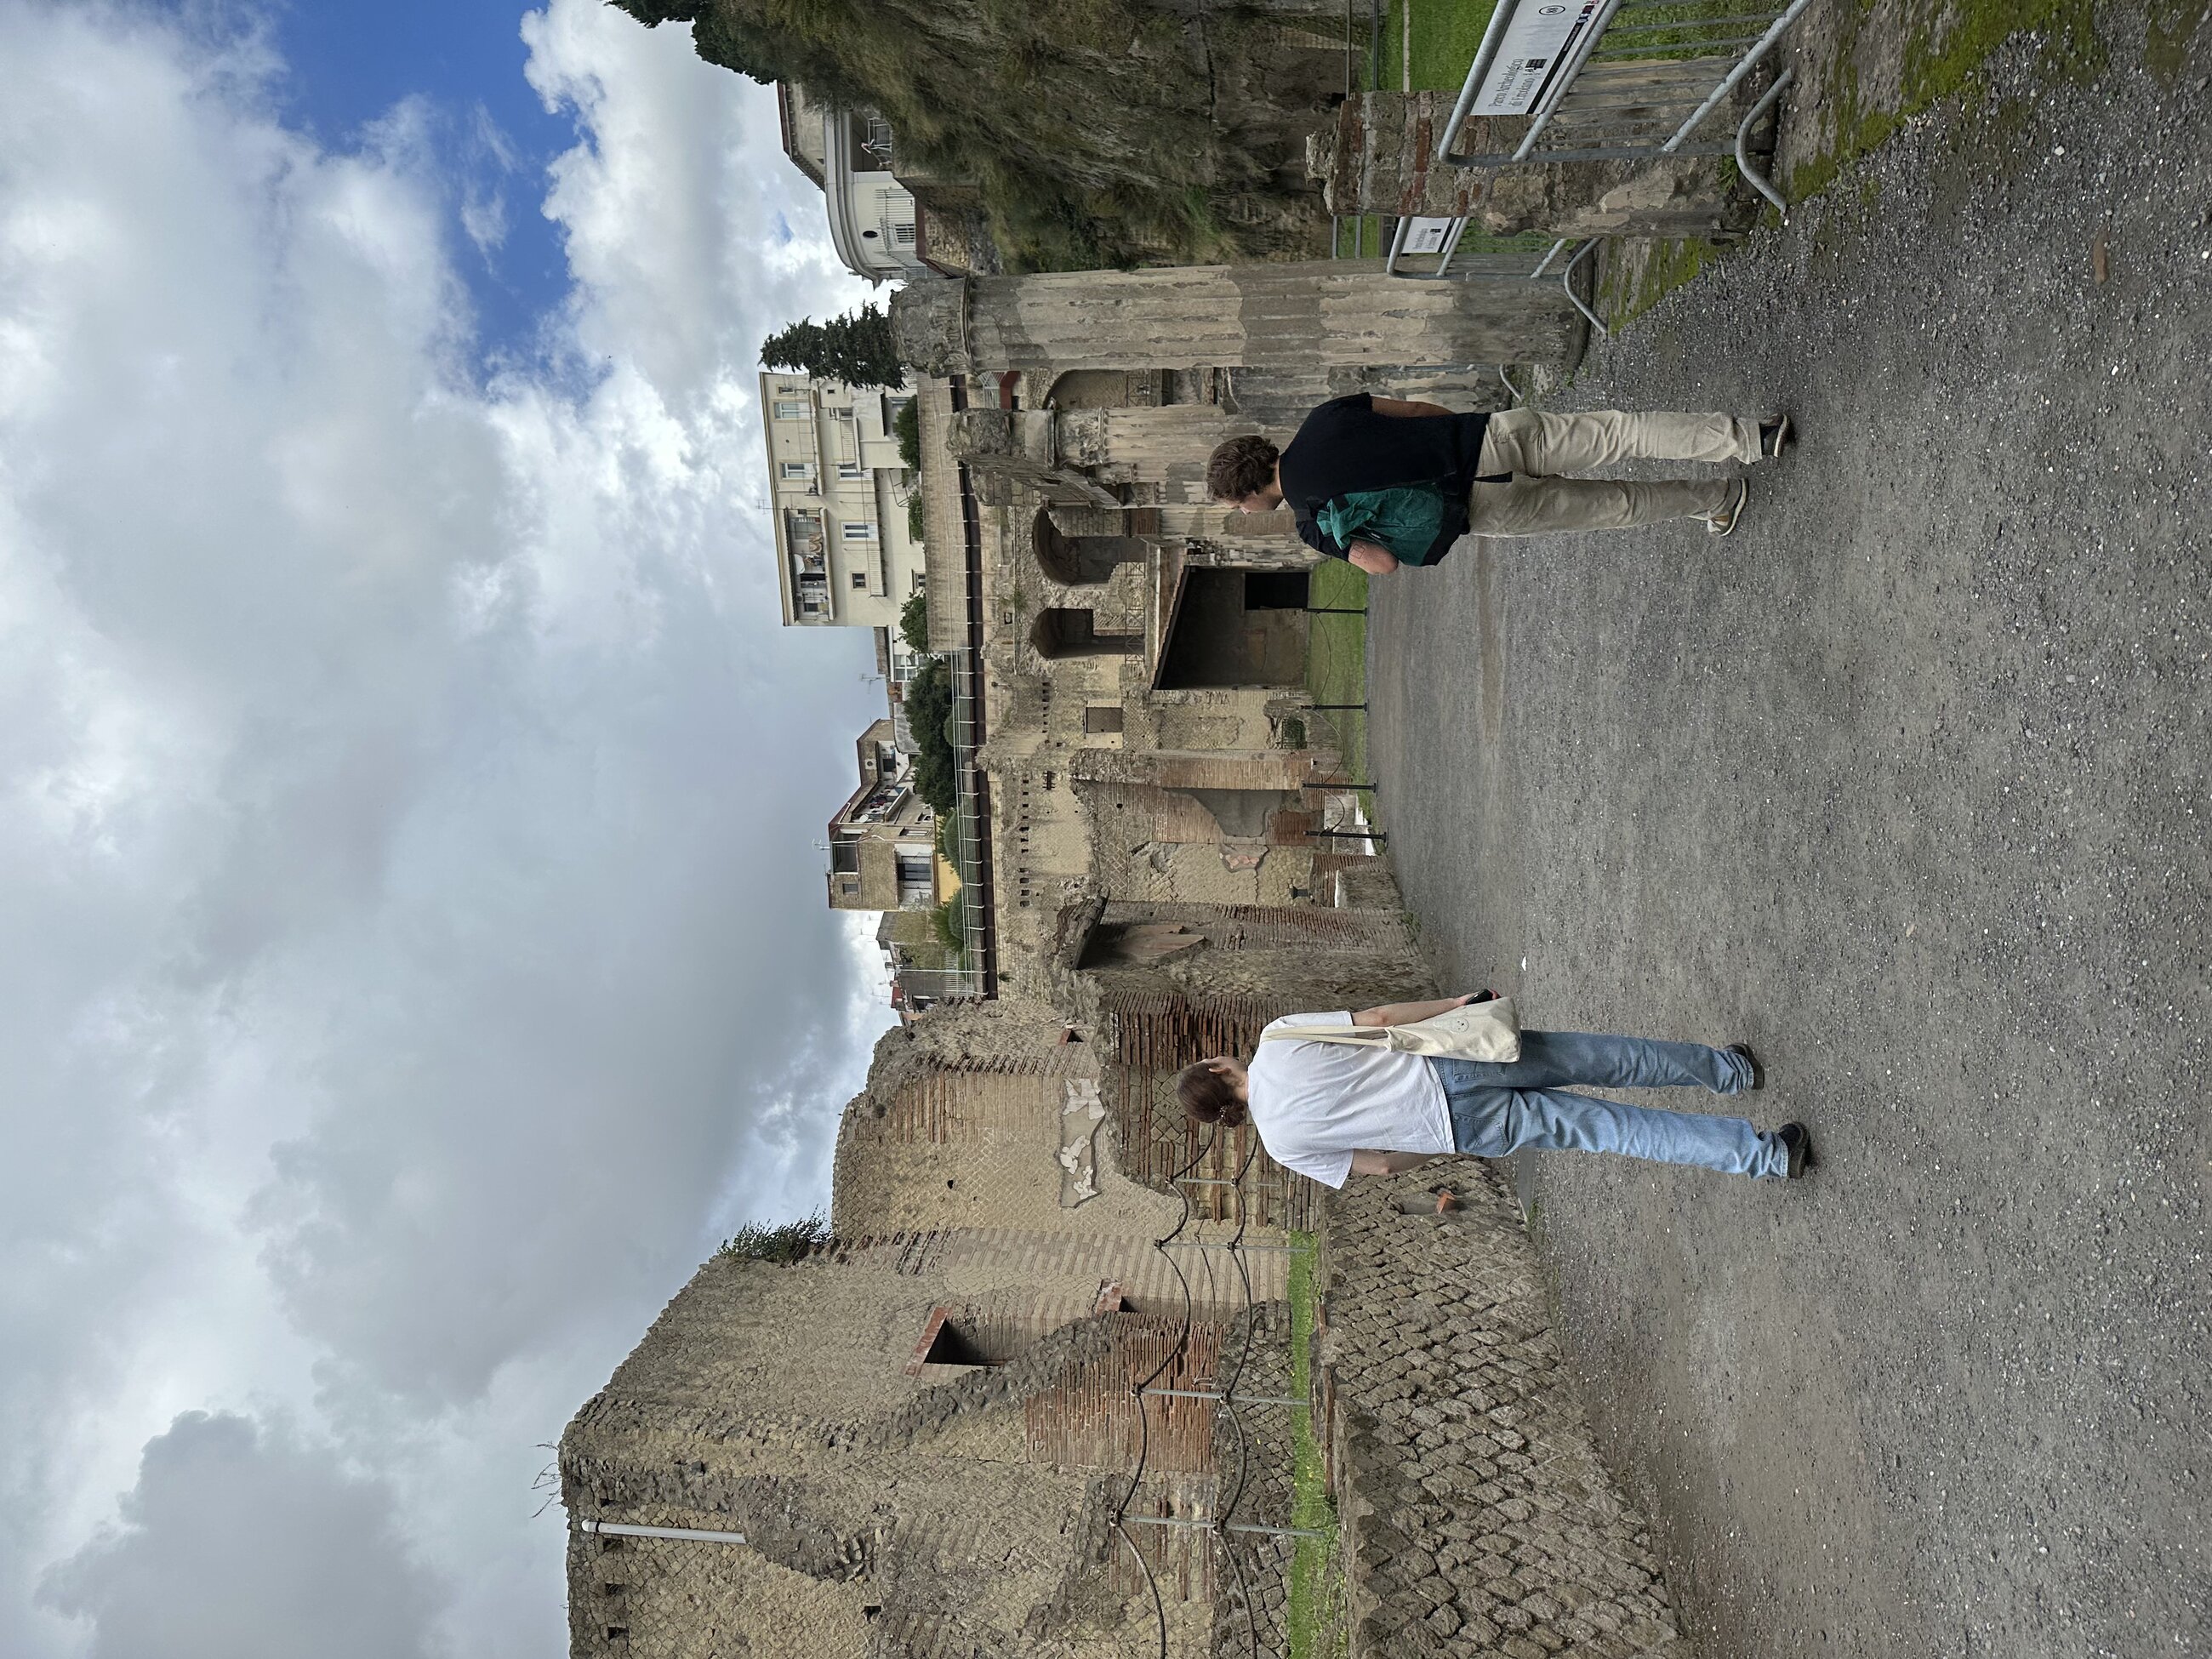 The Herculaneum is way smaller, but maybe even prettier than Pompeii!